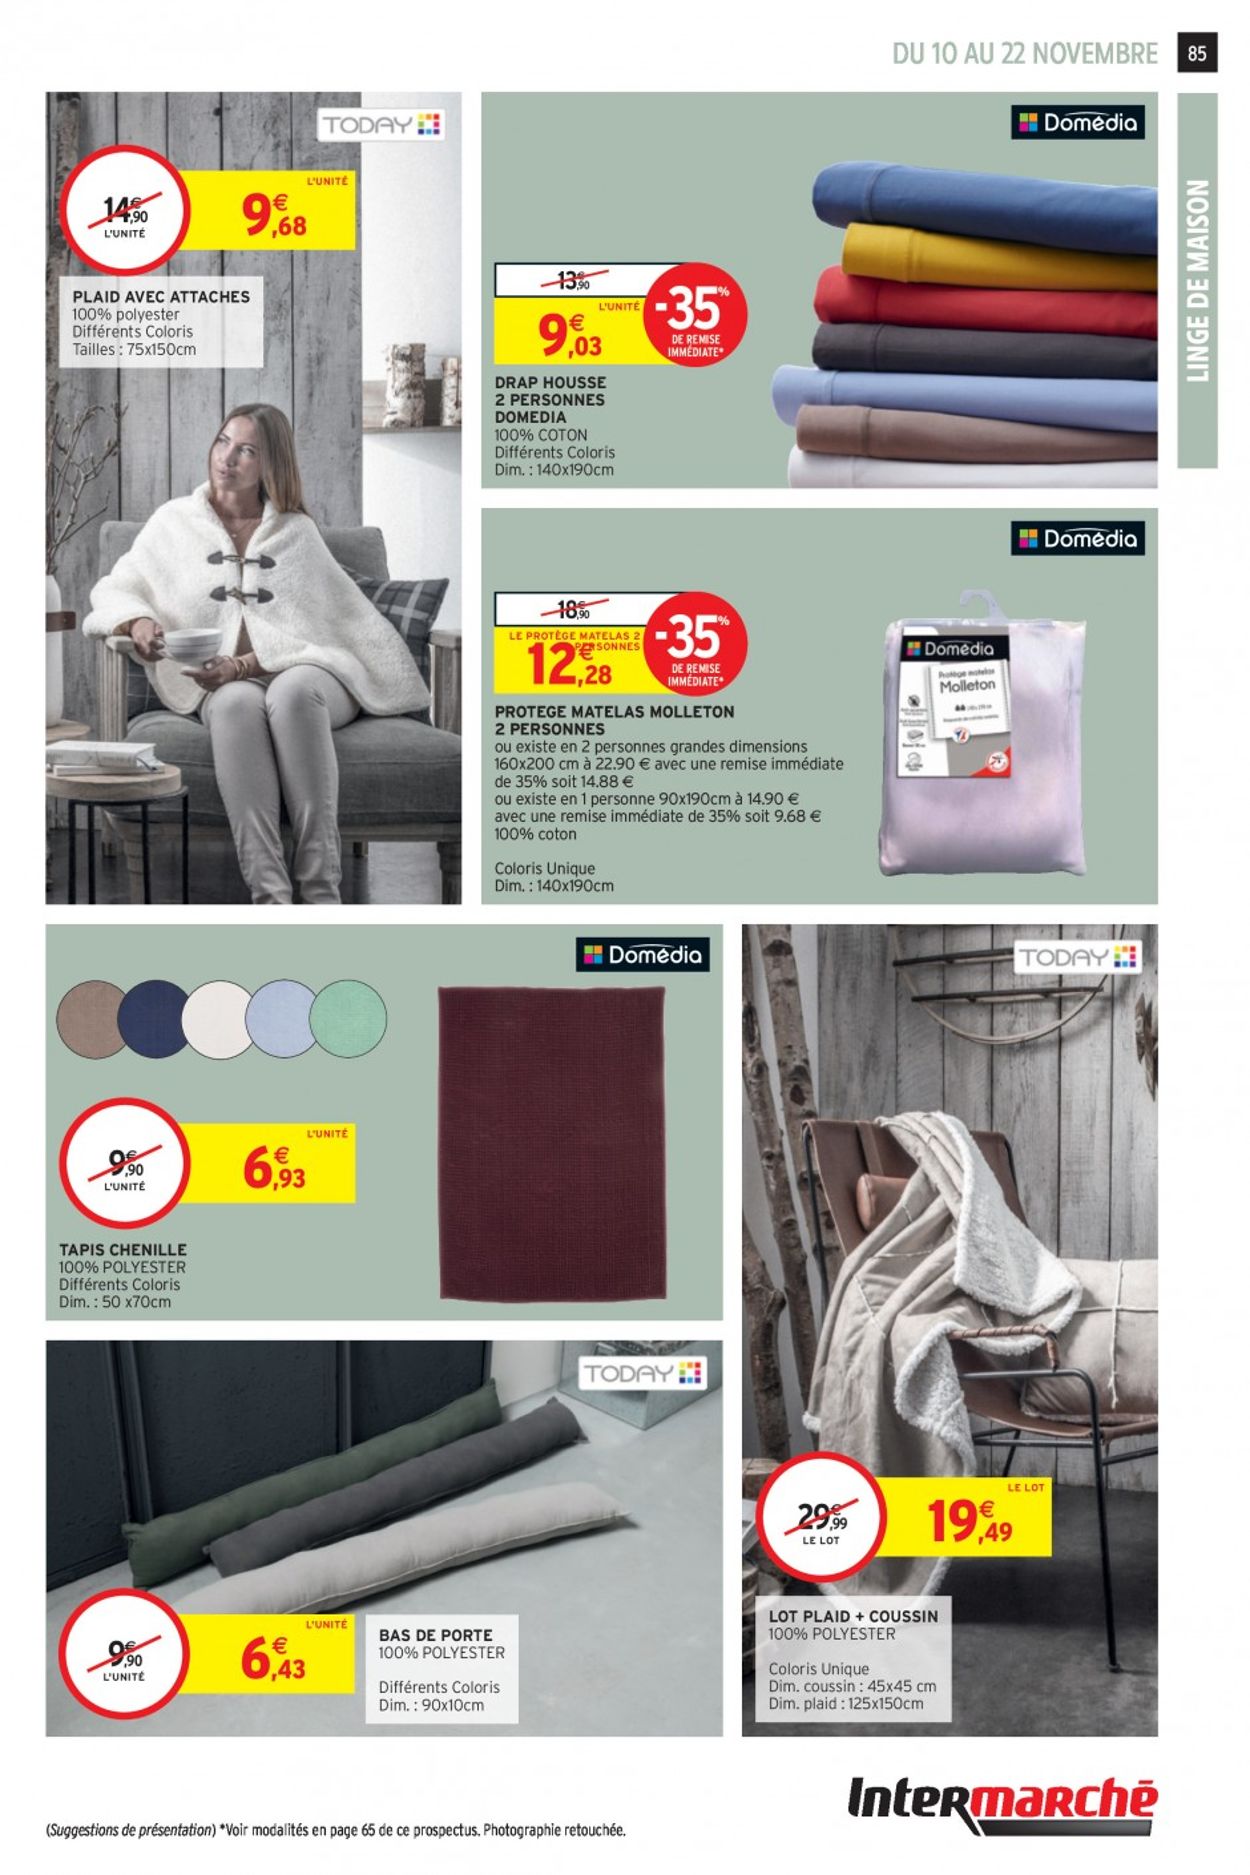 Intermarché Black Friday 2020 Catalogue - 10.11-22.11.2020 (Page 85)